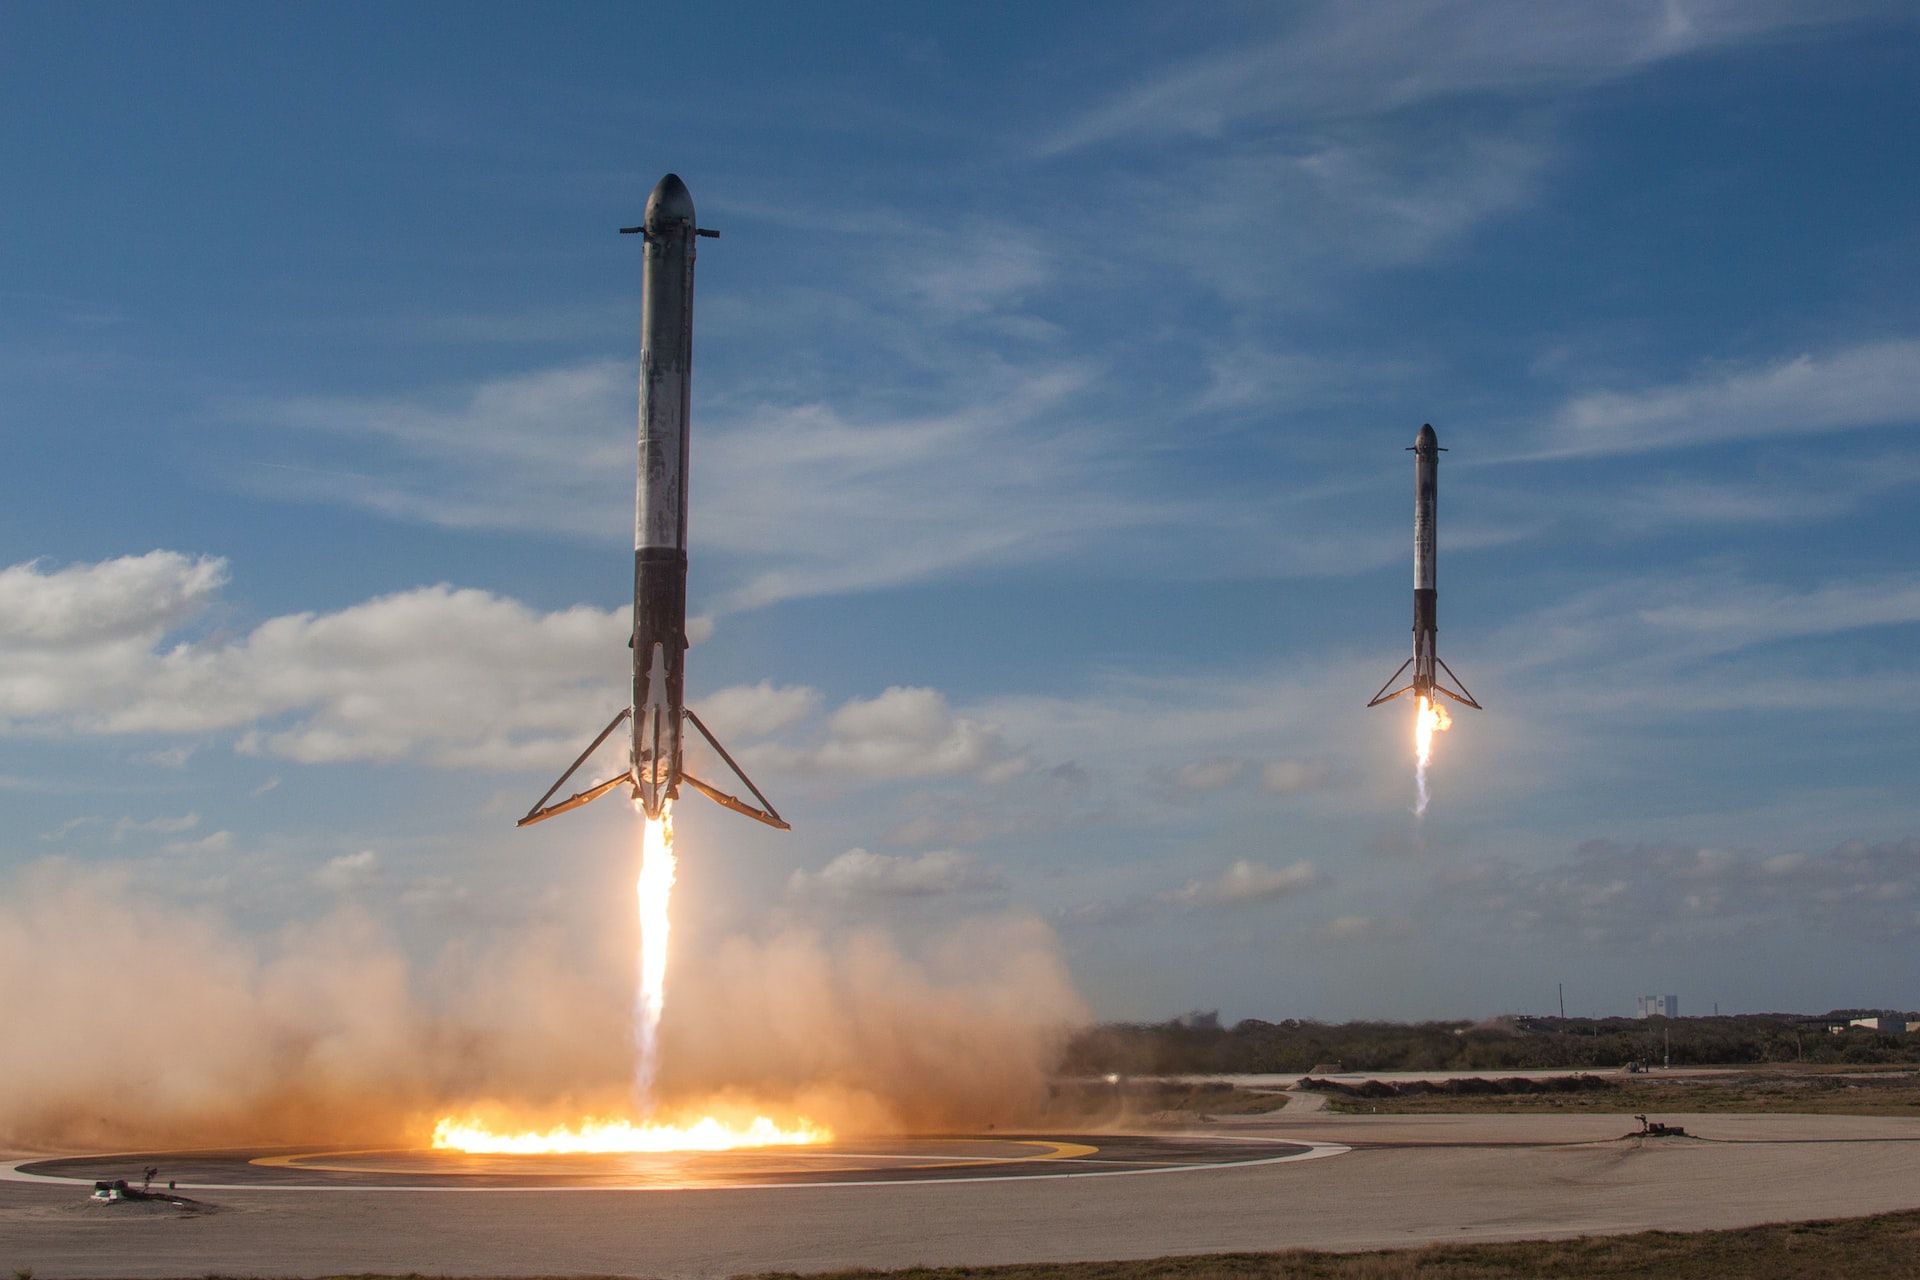 The Most Innovative Technologies and Features of SpaceX Rockets